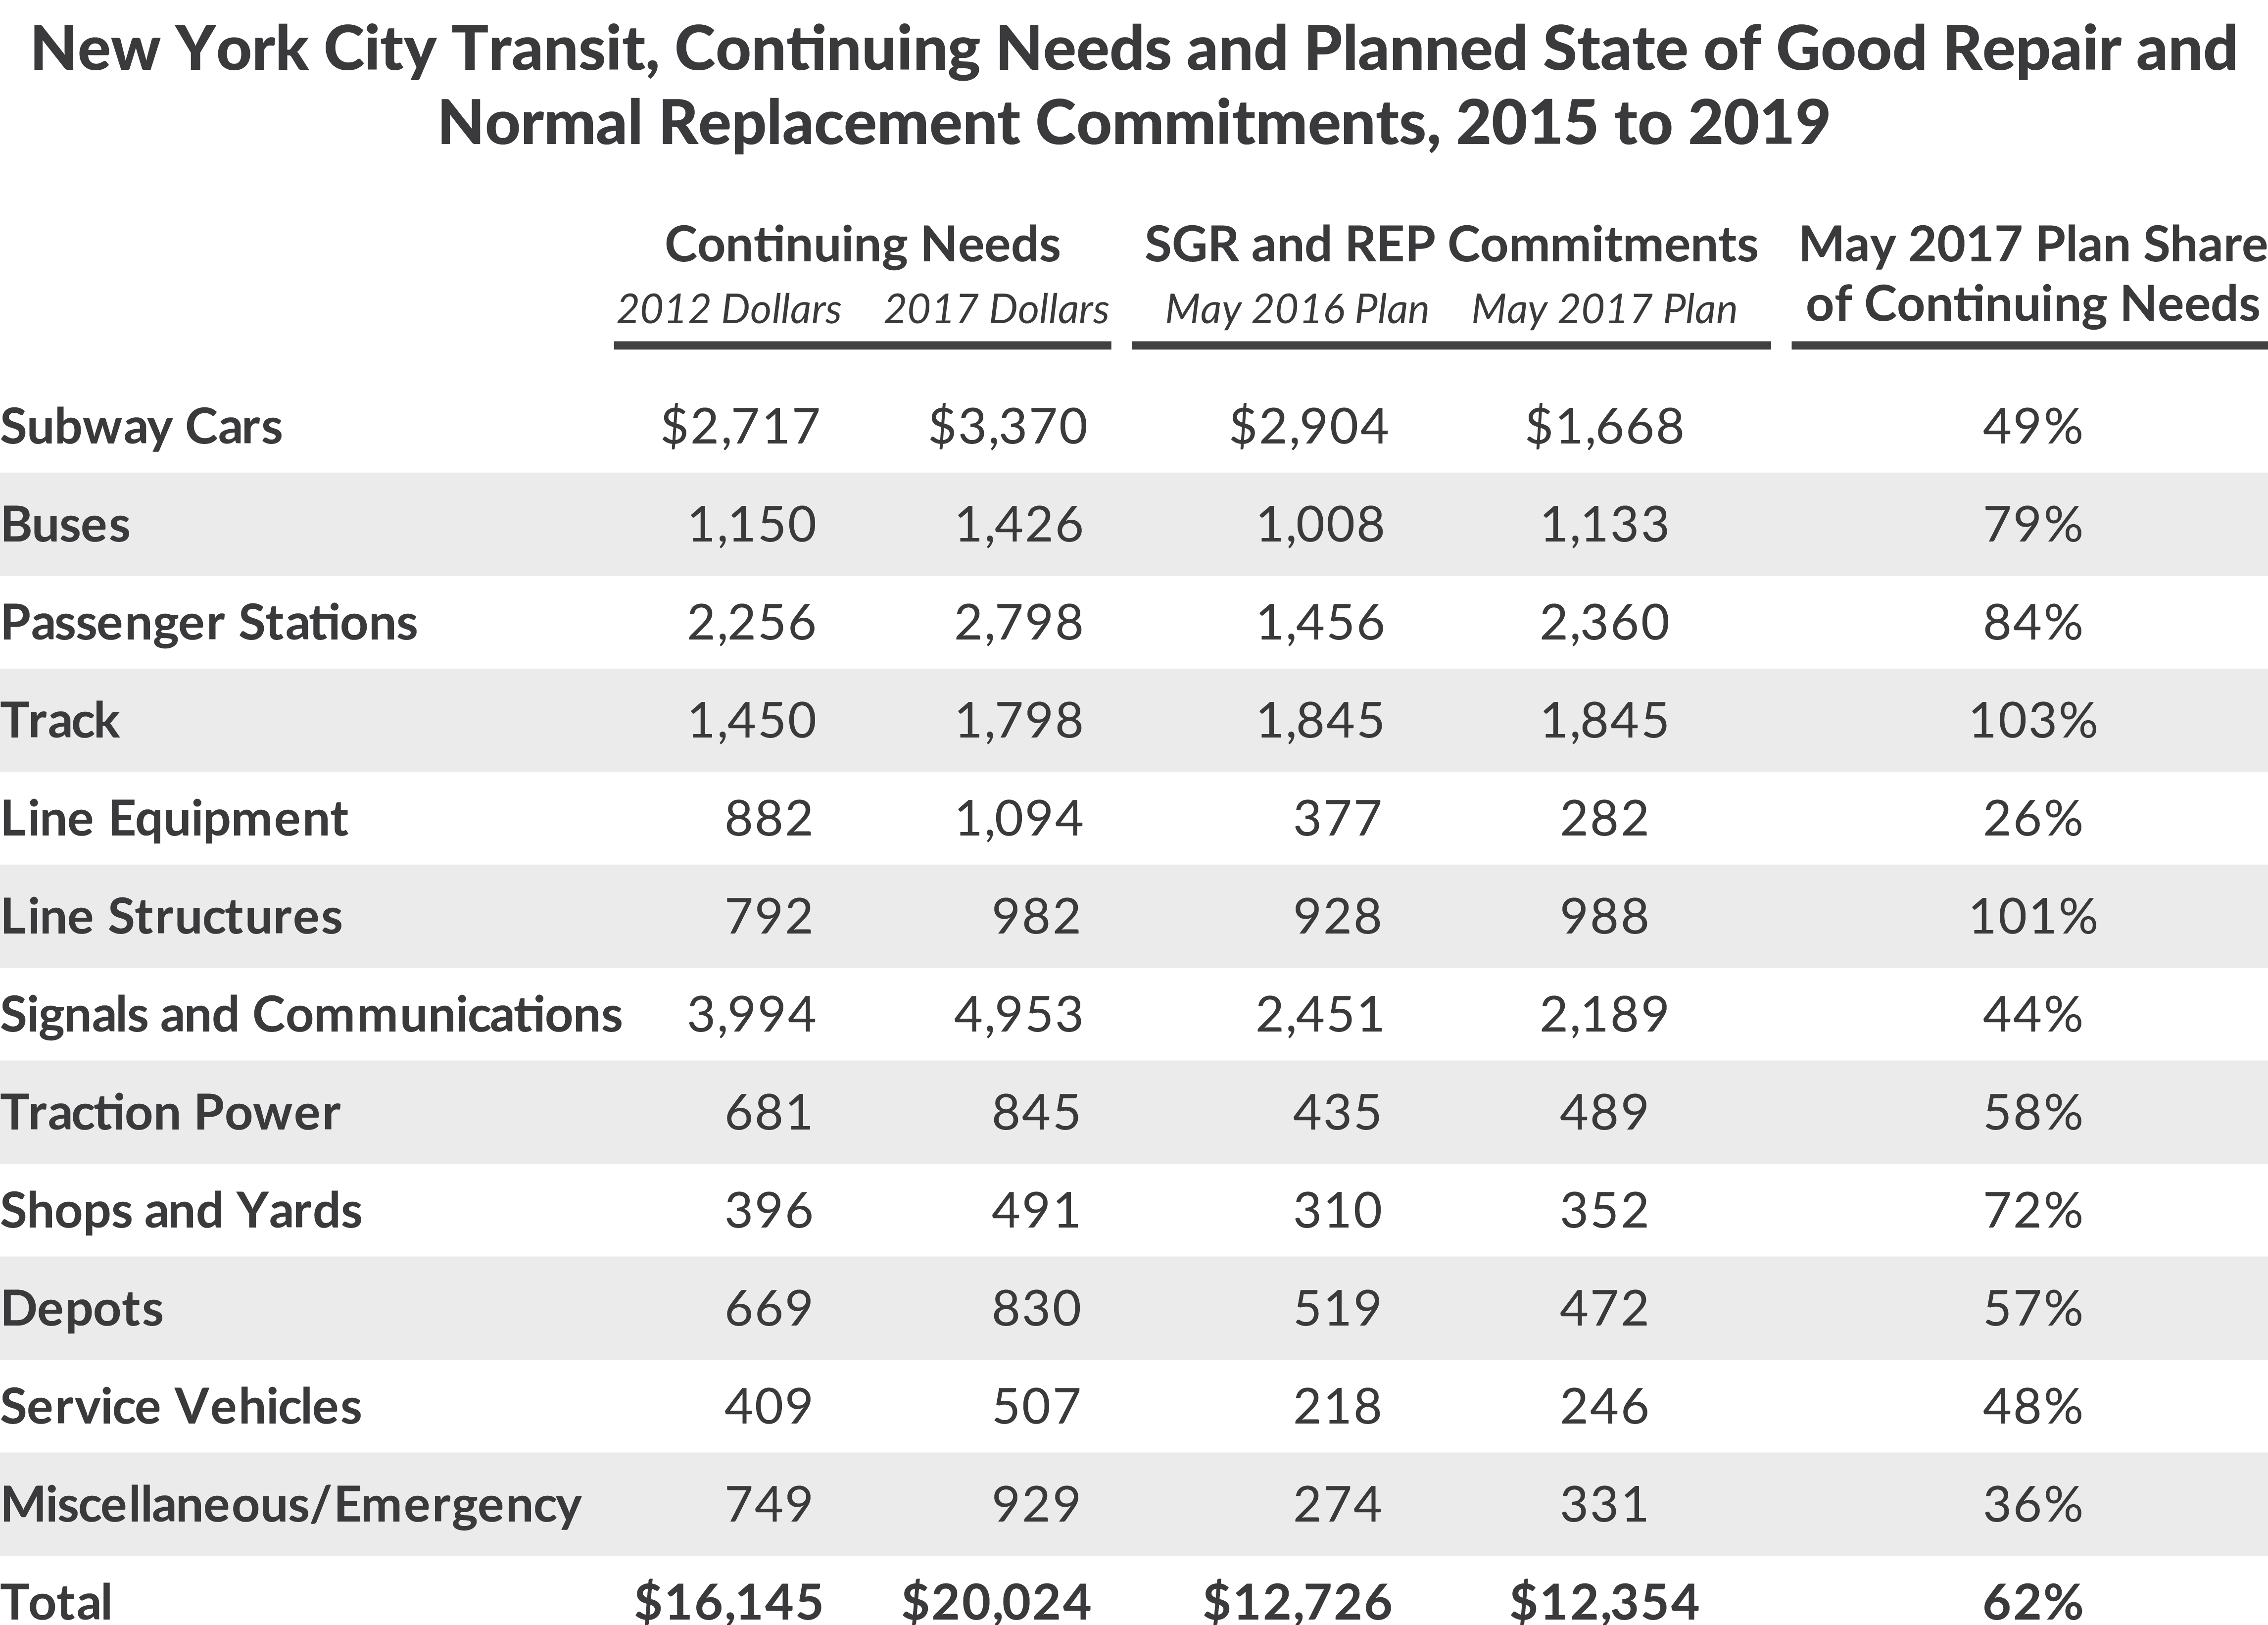 New York City Transit, Continuing Needs and Planned State of Good Repair and Normal Replacement Commitments, 2015 to 2019